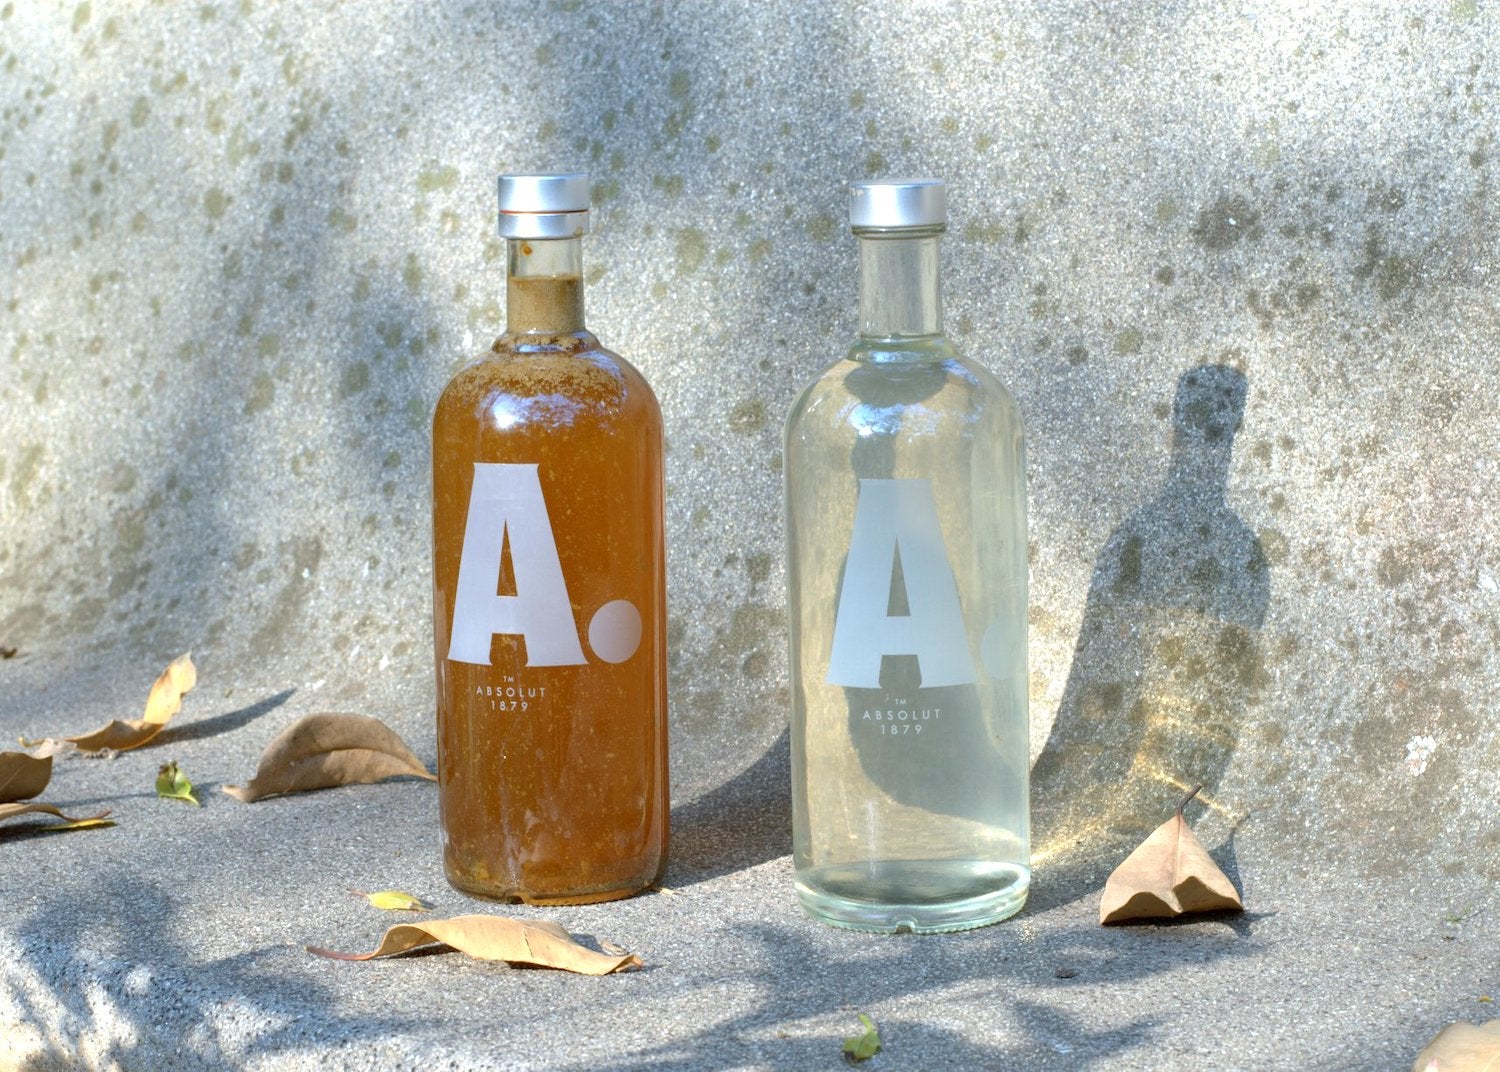 Two Absolut bottles show before and after water treatment system